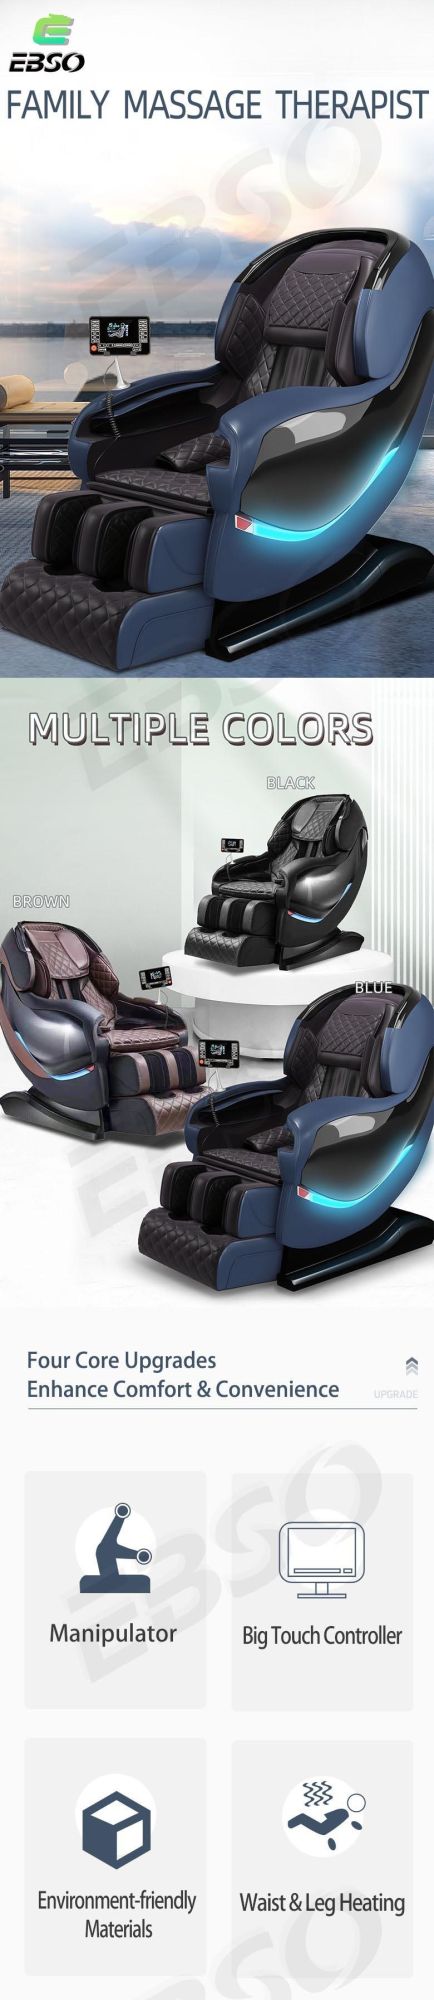 Luxury 3D Massage Chair with Big Screen Controller